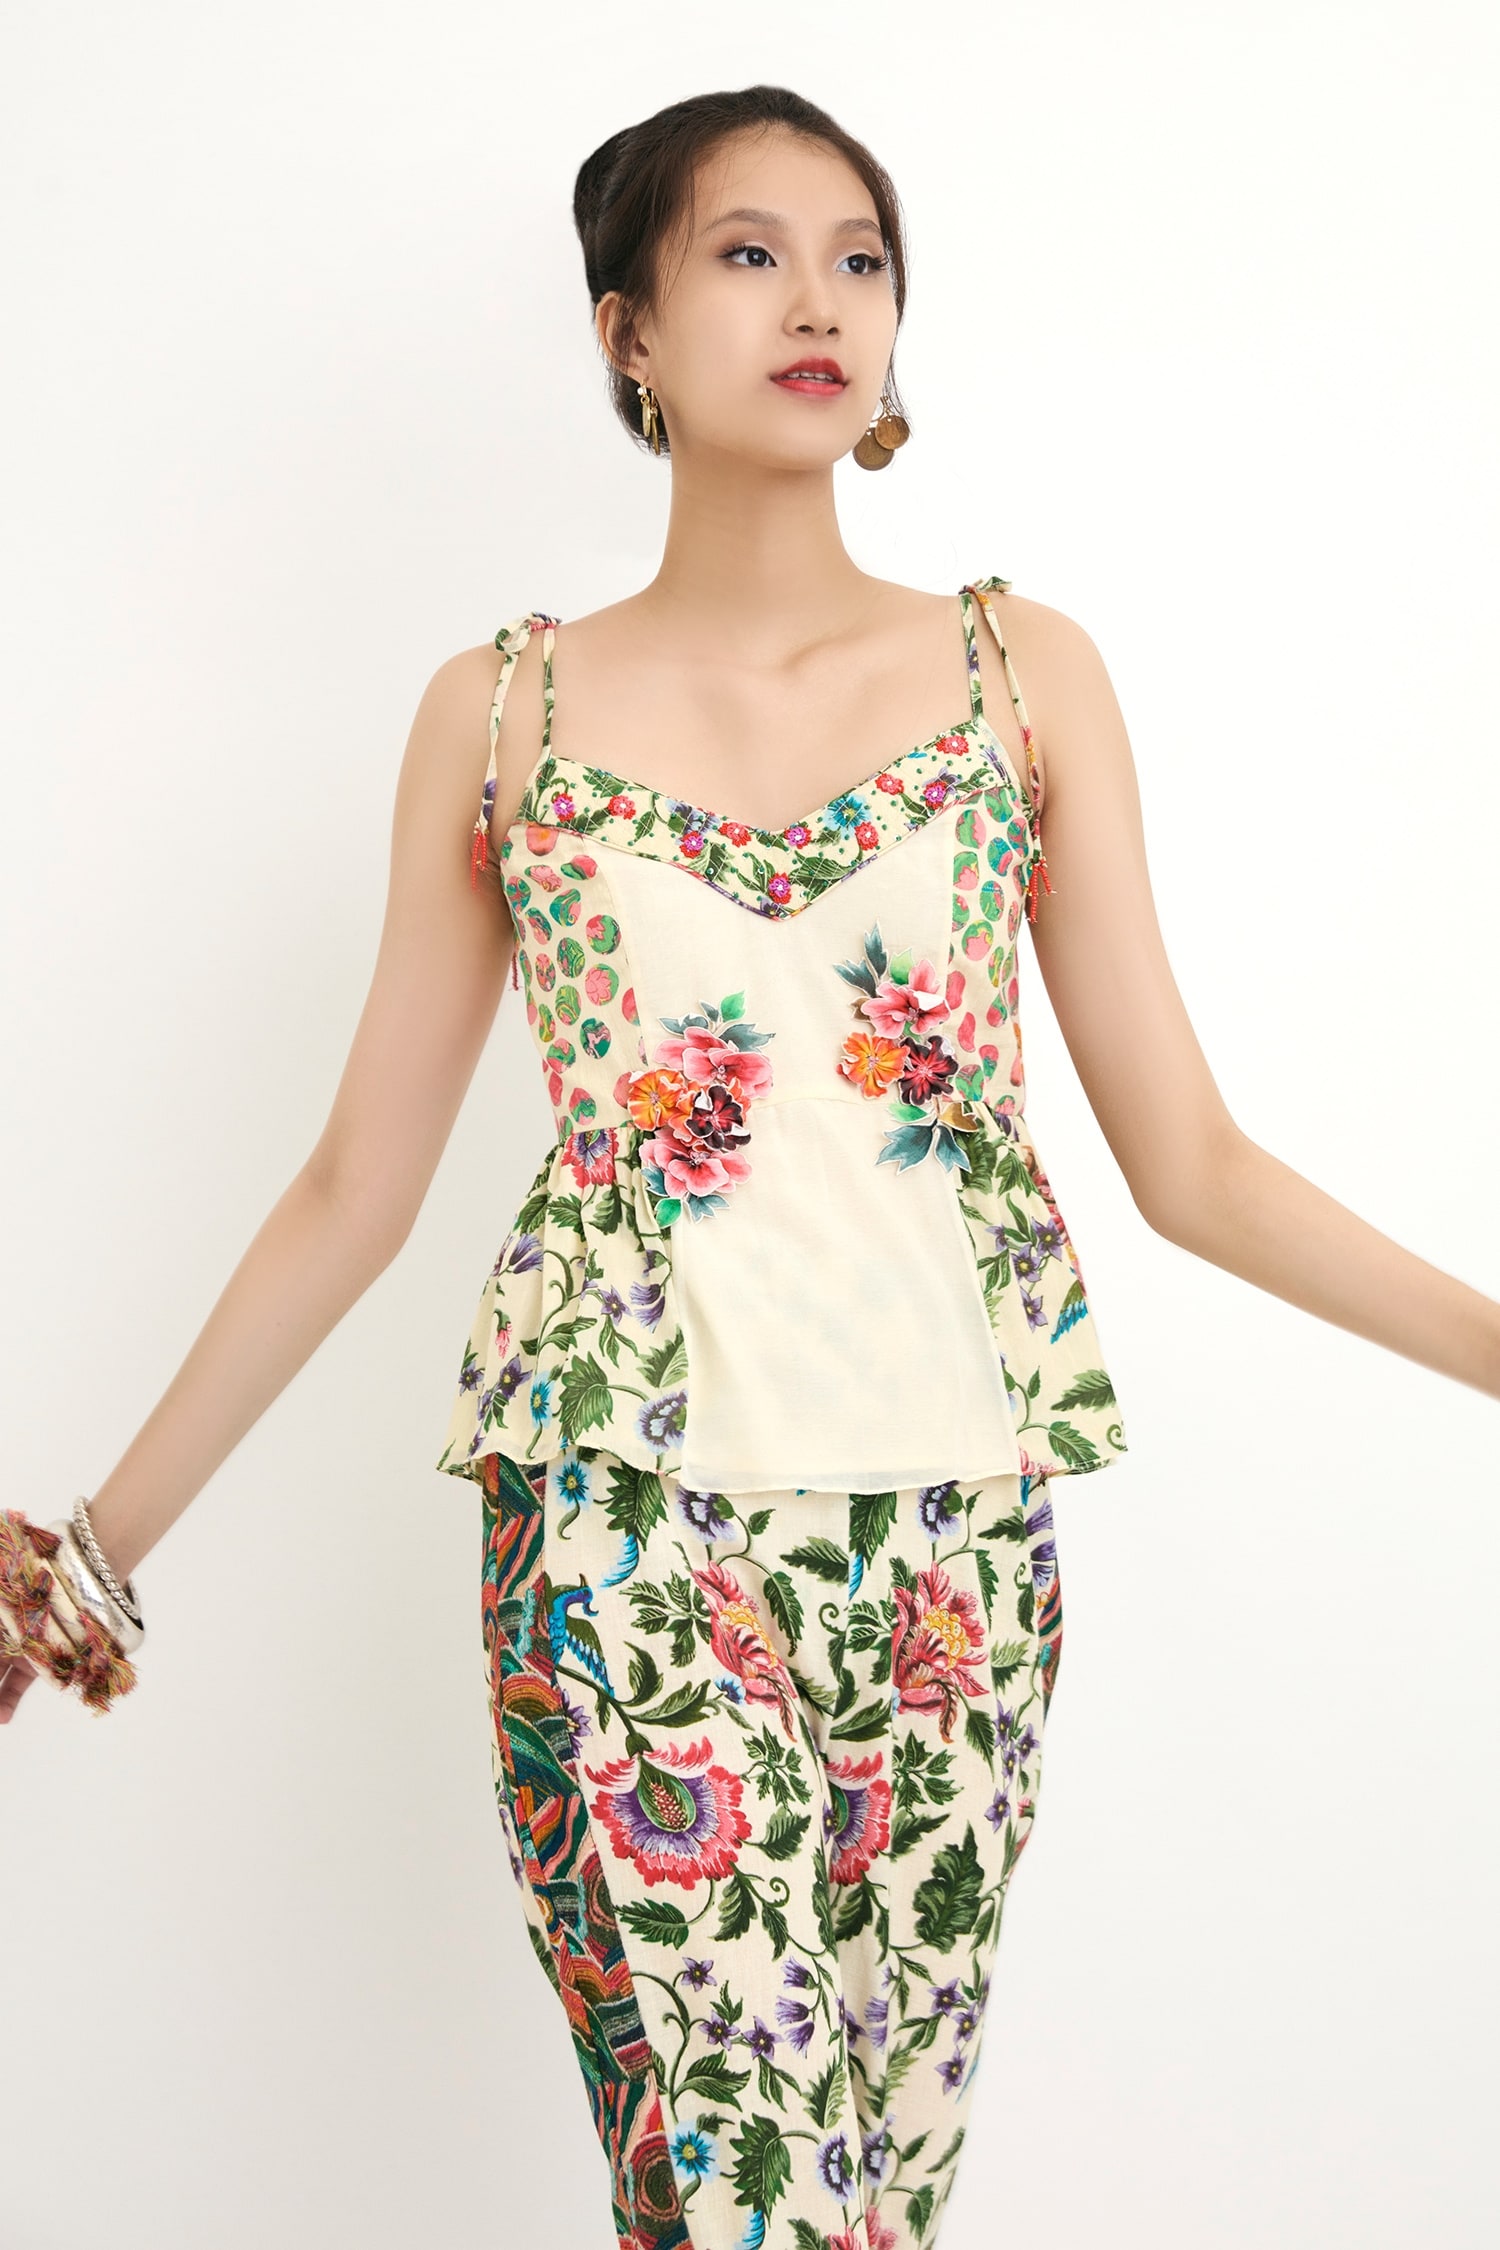 Sensual Flowers Giada Structured Top